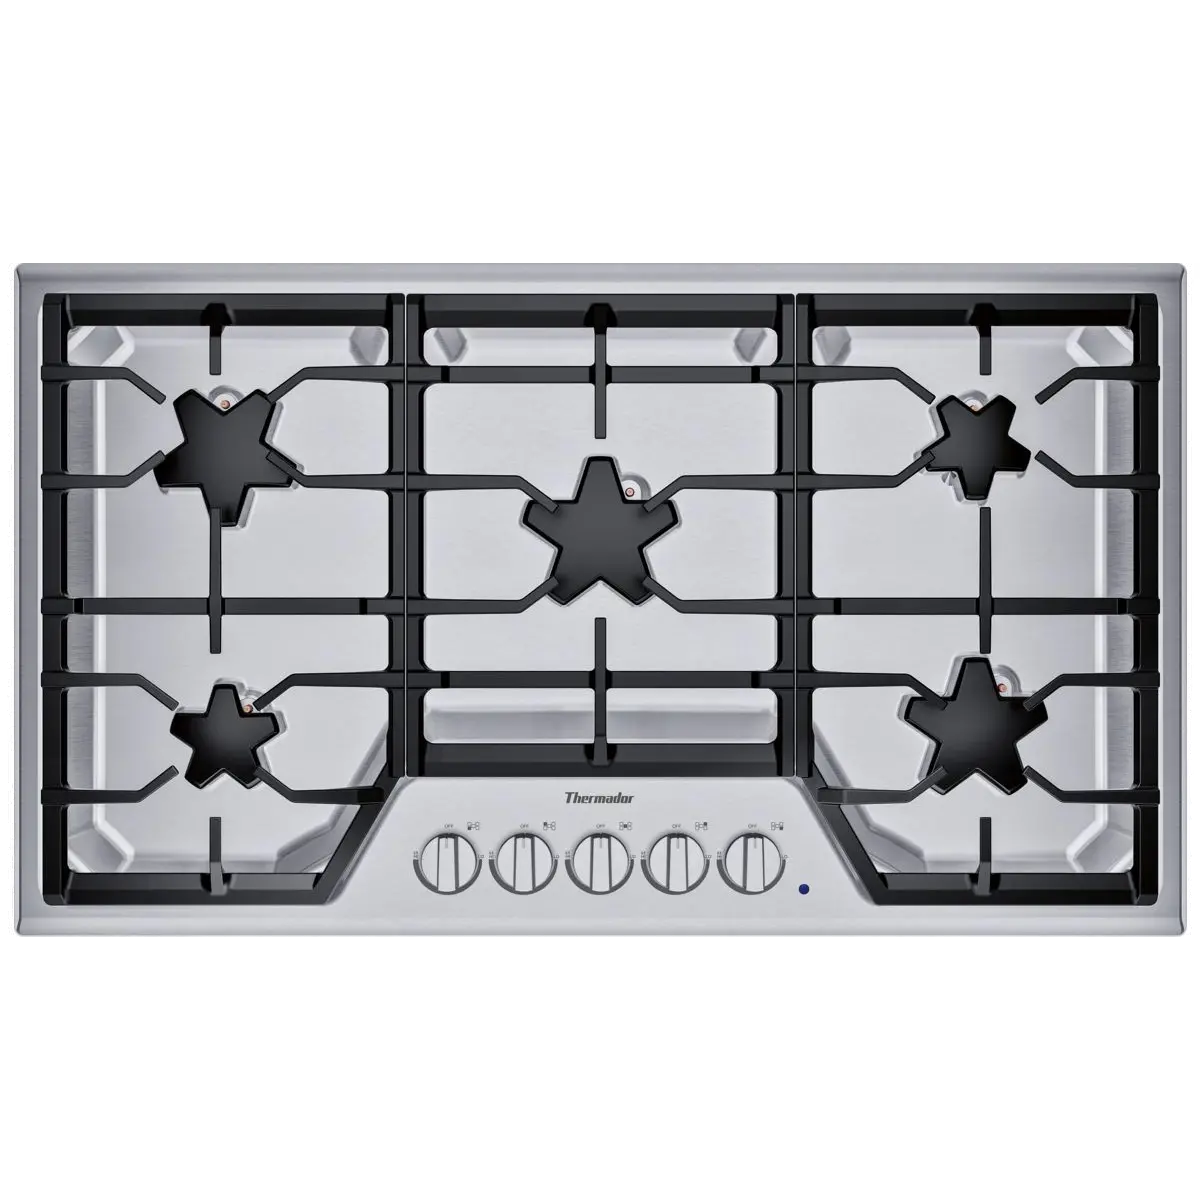 SGS365TS Thermador Masterpiece 36 Inch Gas Cooktop with Continuous Grates - Stainless Steel-1